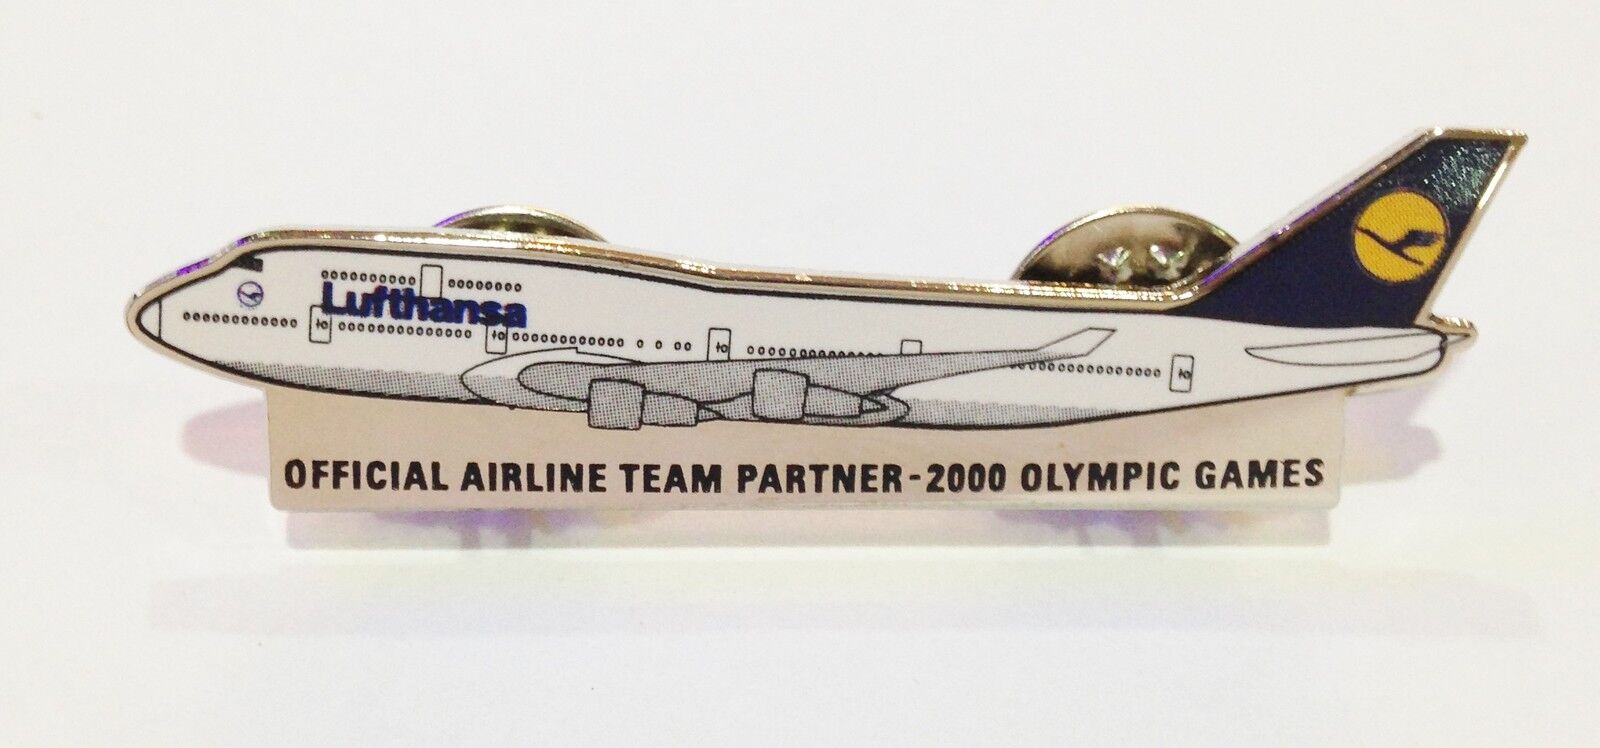 SYDNEY OLYMPIC GAMES 2000 LUFTHANSA OFFICIAL AIRLINE TEAM PARTNER PIN BADGE #460